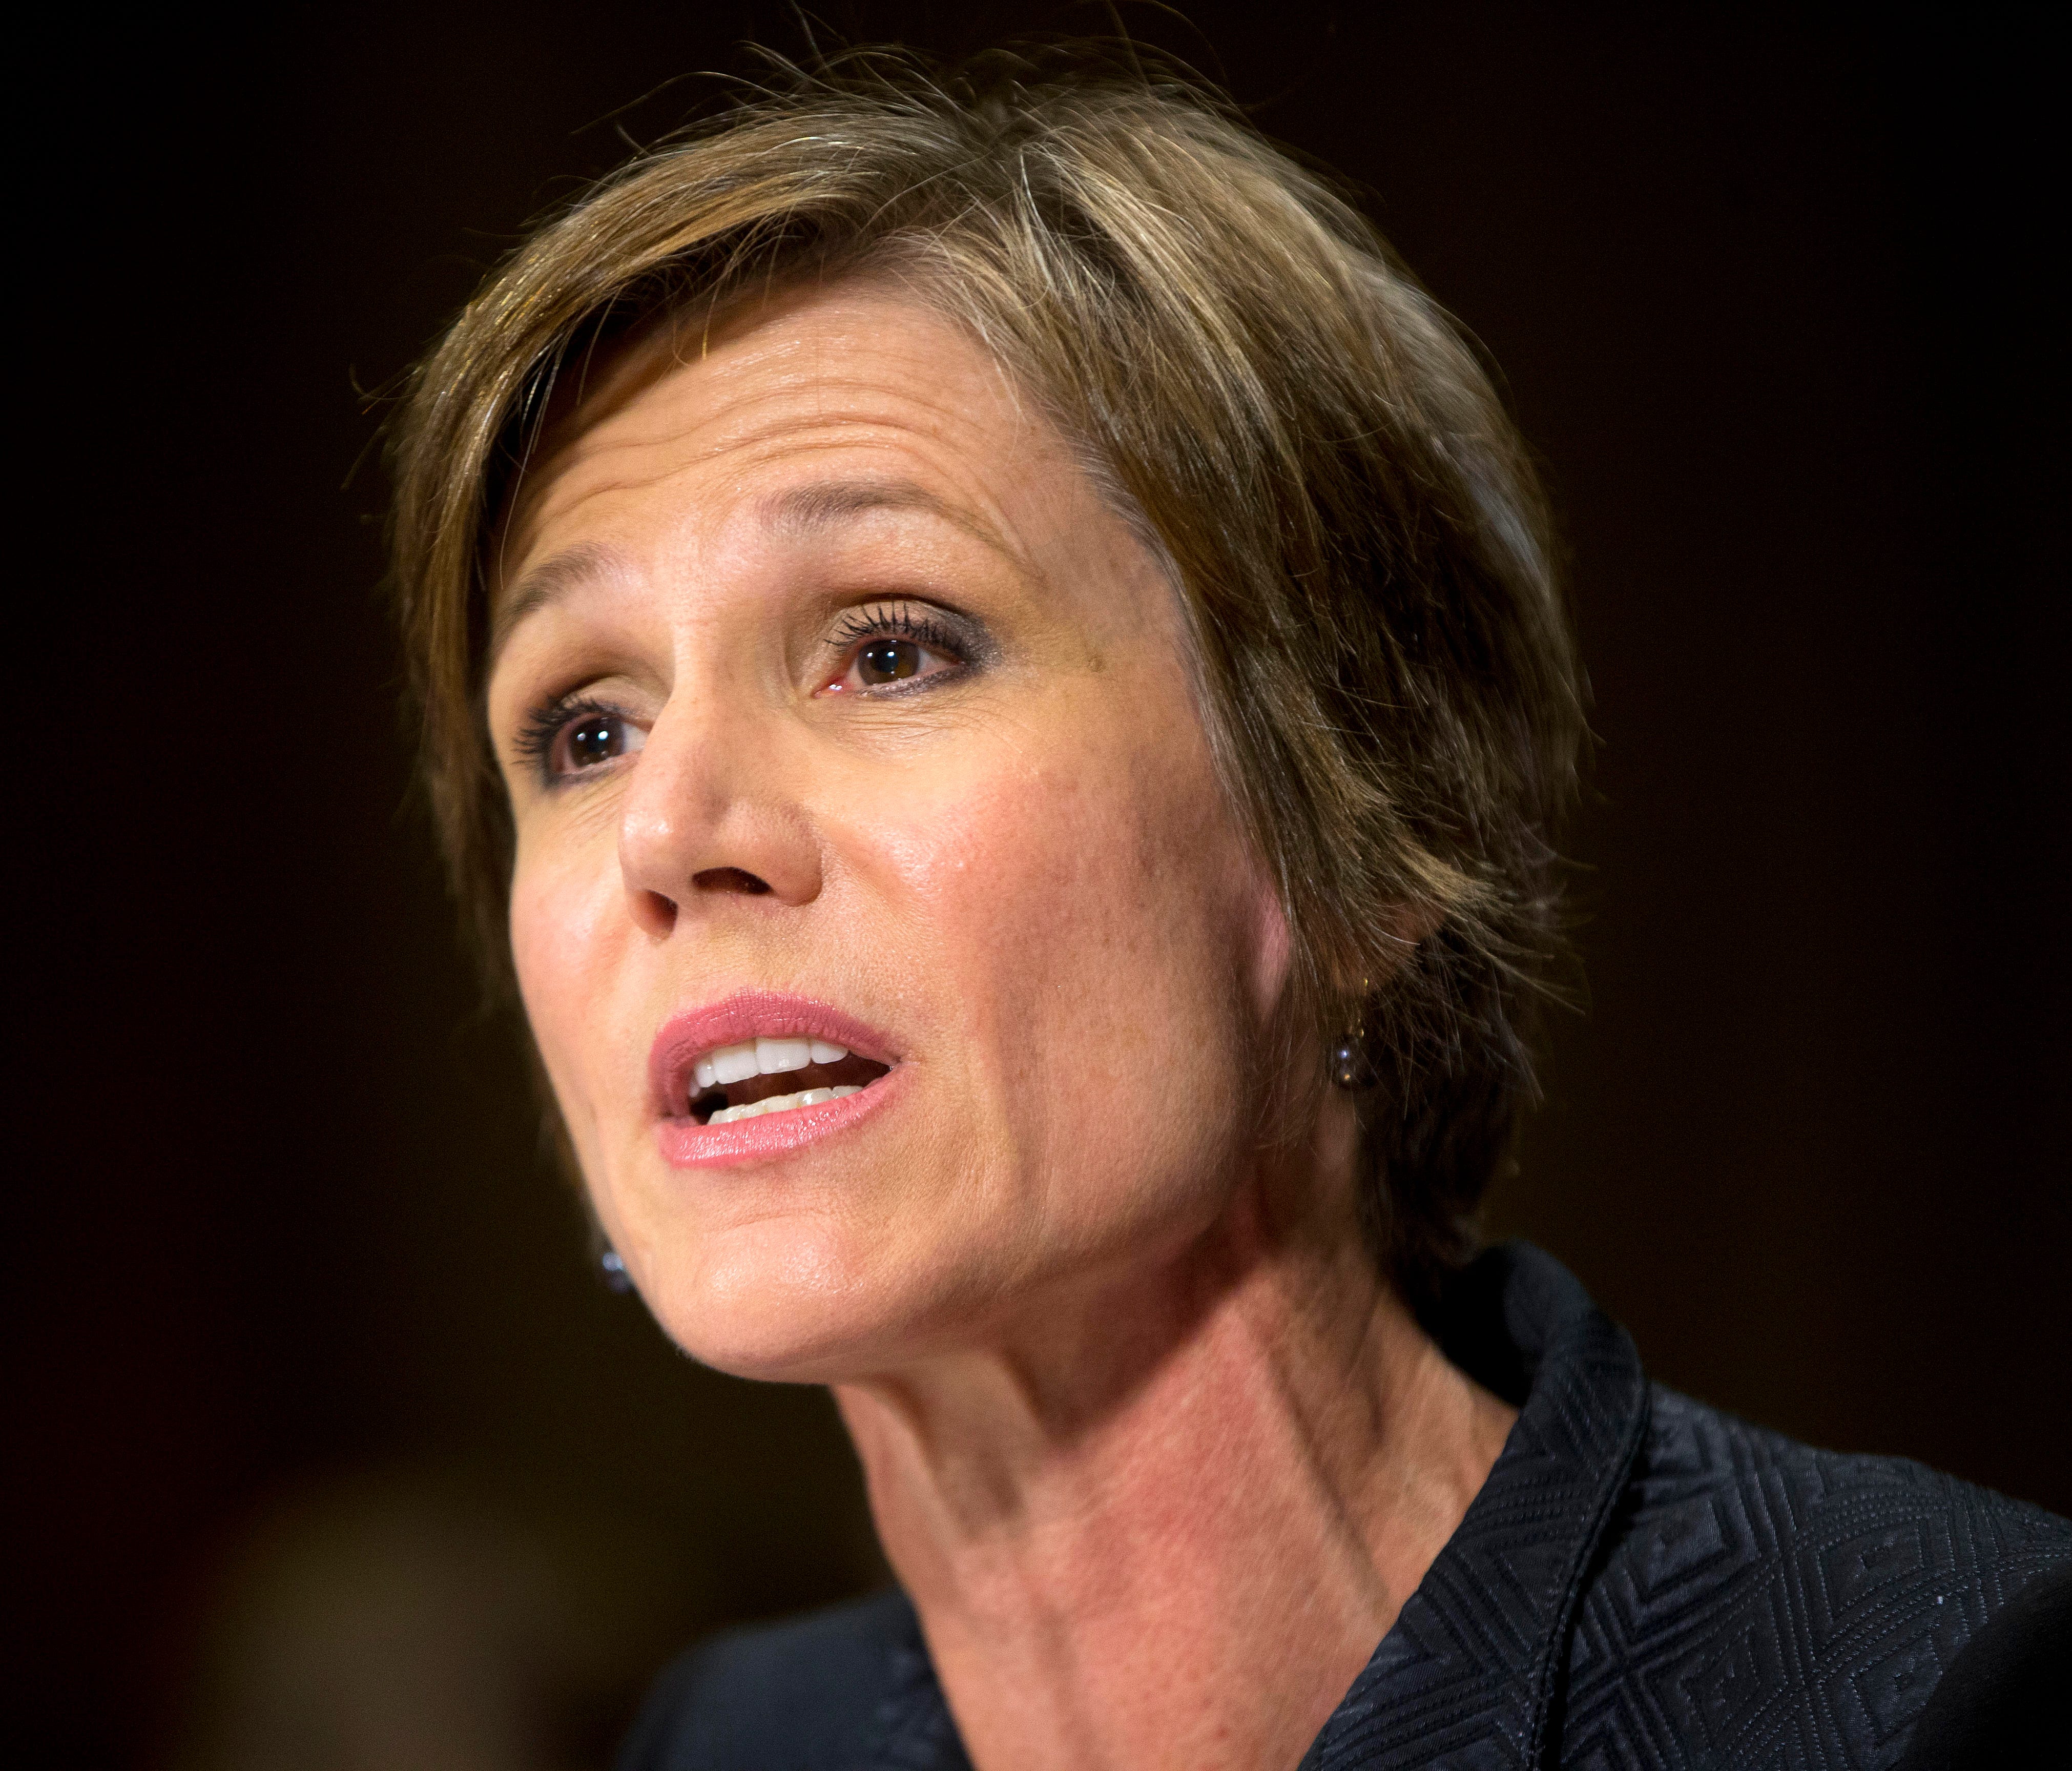 Deputy Attorney General Sally Quillian Yates testified on Capitol Hill in March 2015.